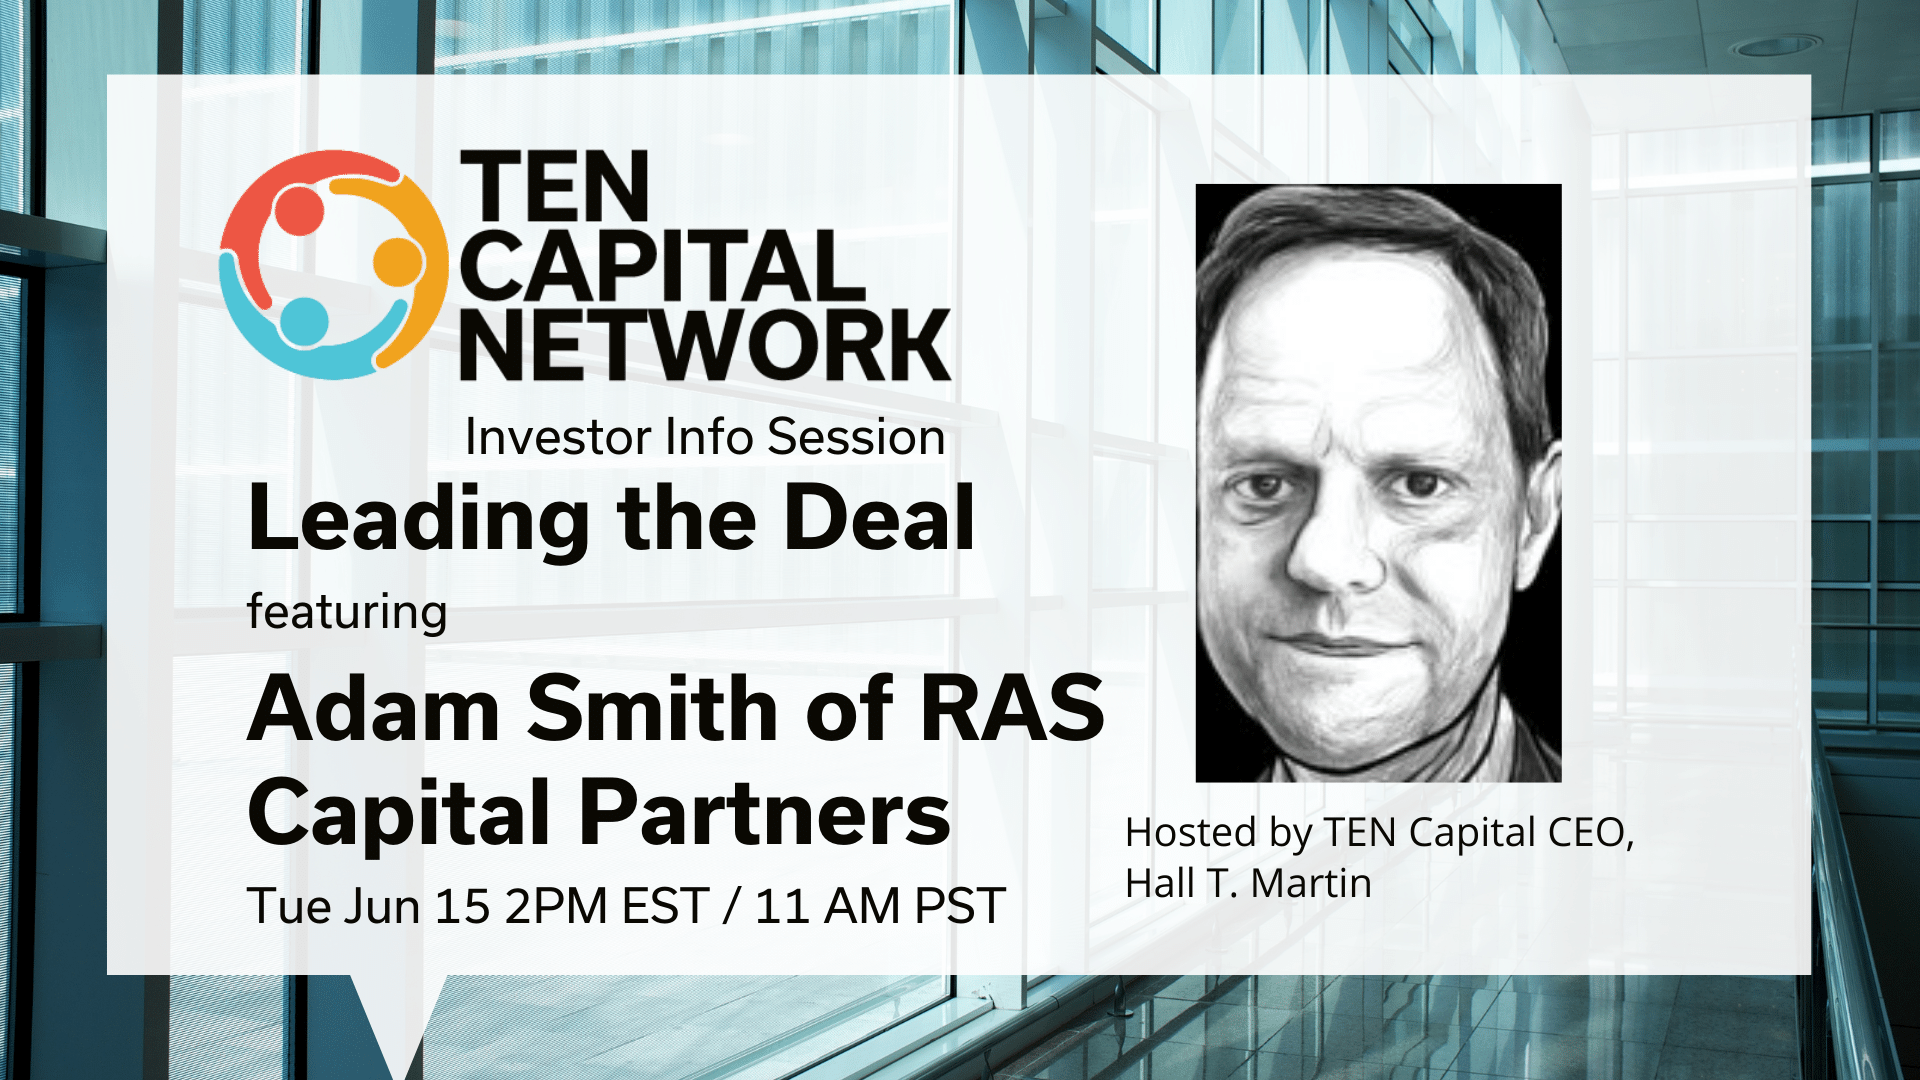 TEN Capital Investor Info Session: Leading the Deal with Adam Smith of RAS Capital Partners